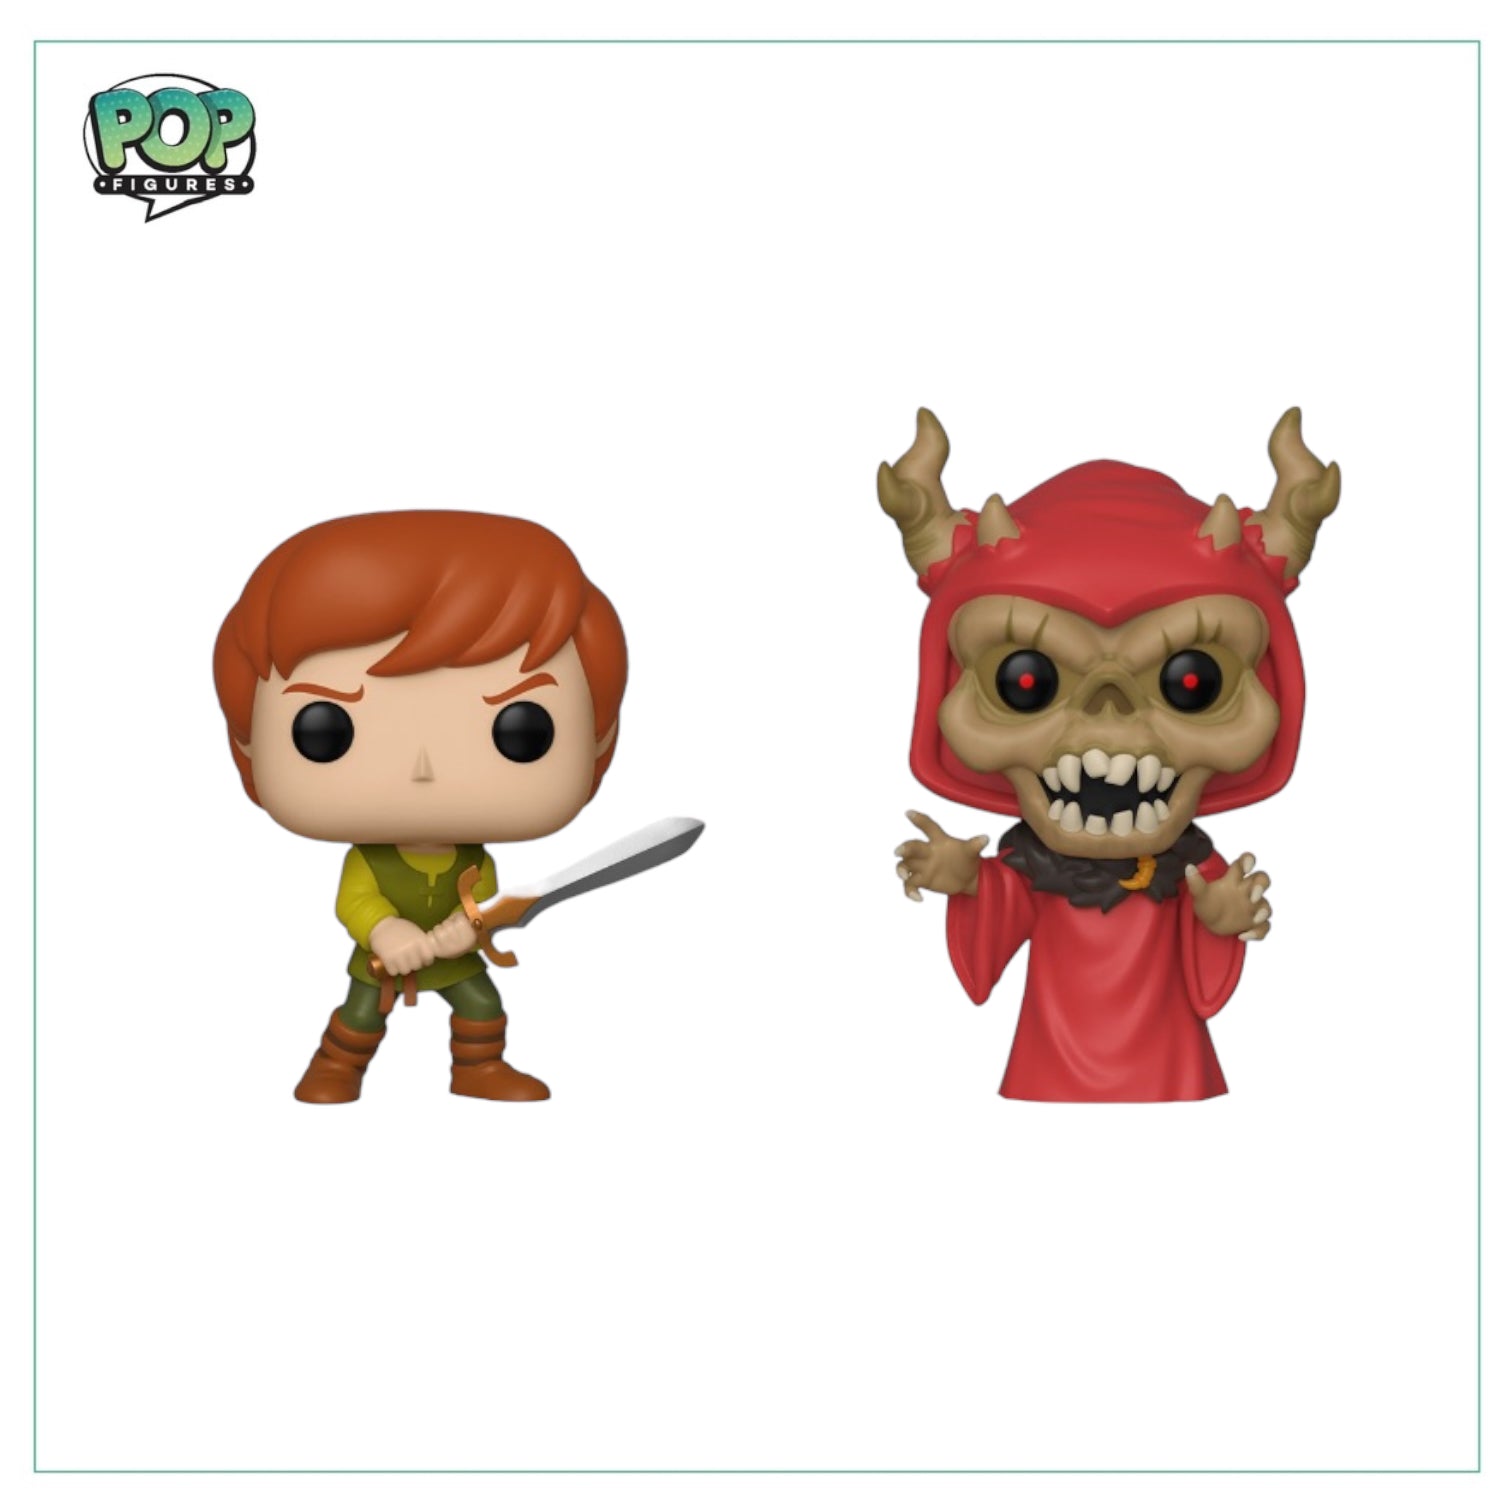 Taran & Horned King Deluxe Funko 2 Pack! - The Black Cauldron - 2019 SDCC Shared Exclusive